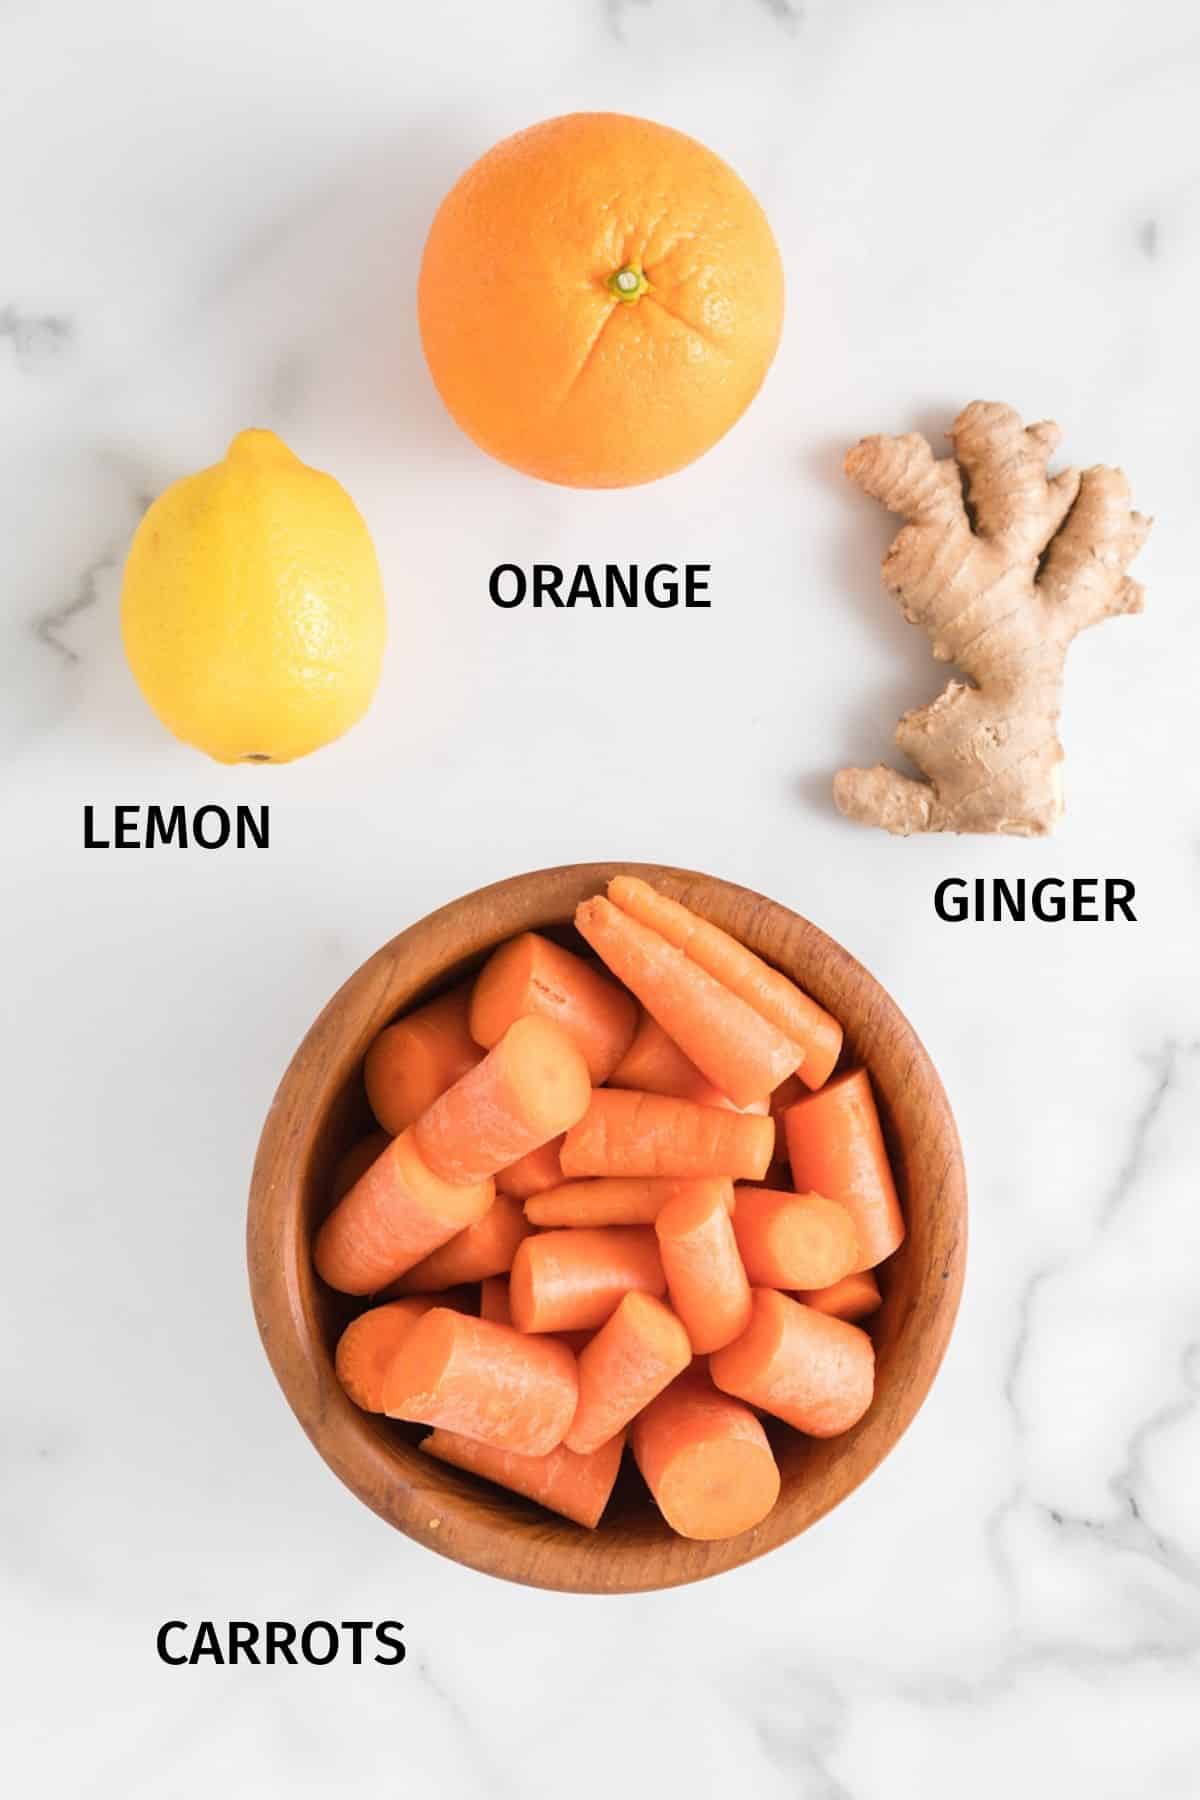 Ingredients for carrot orange juice on a white surface.